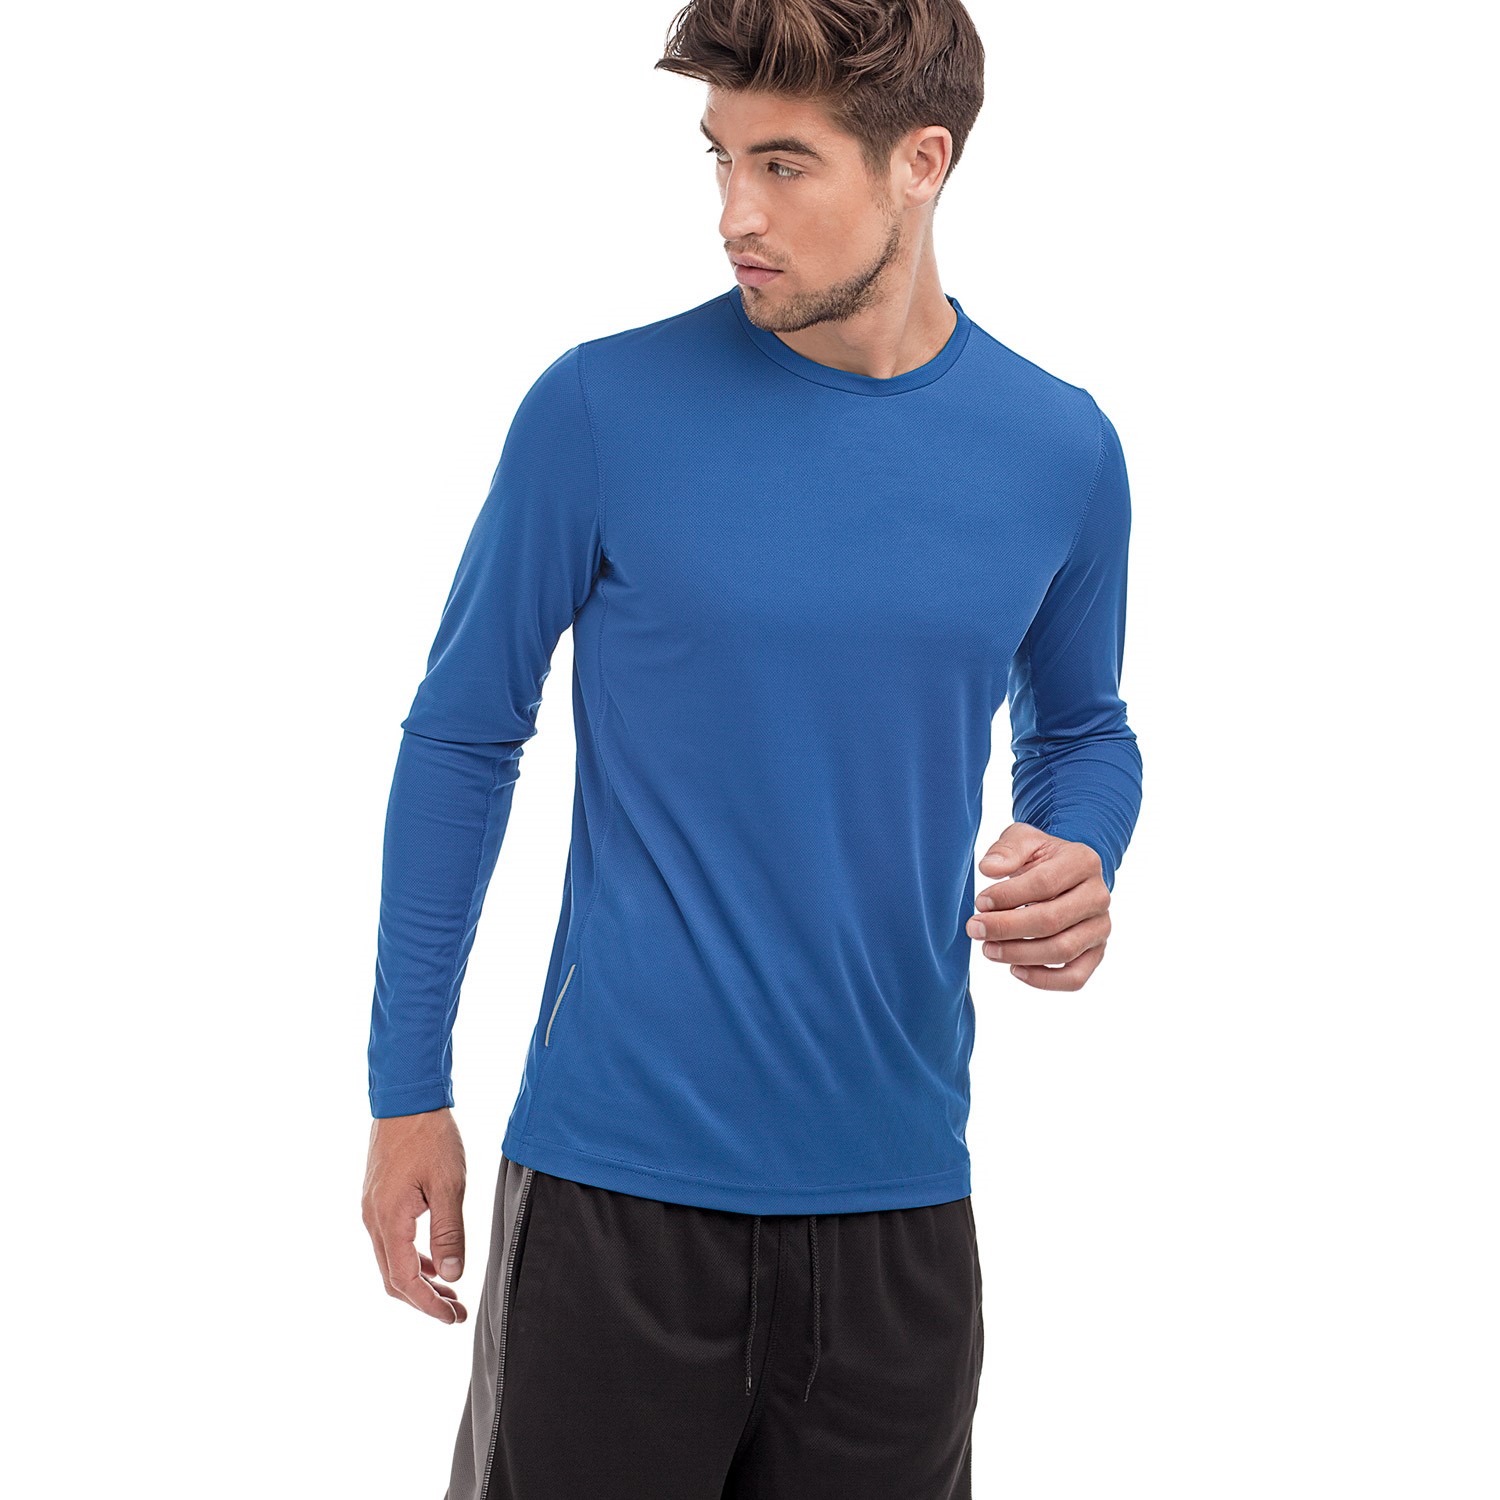 2-Pack Hanes Sports Performance Long Sleeve - T-shirts - Clothing ...